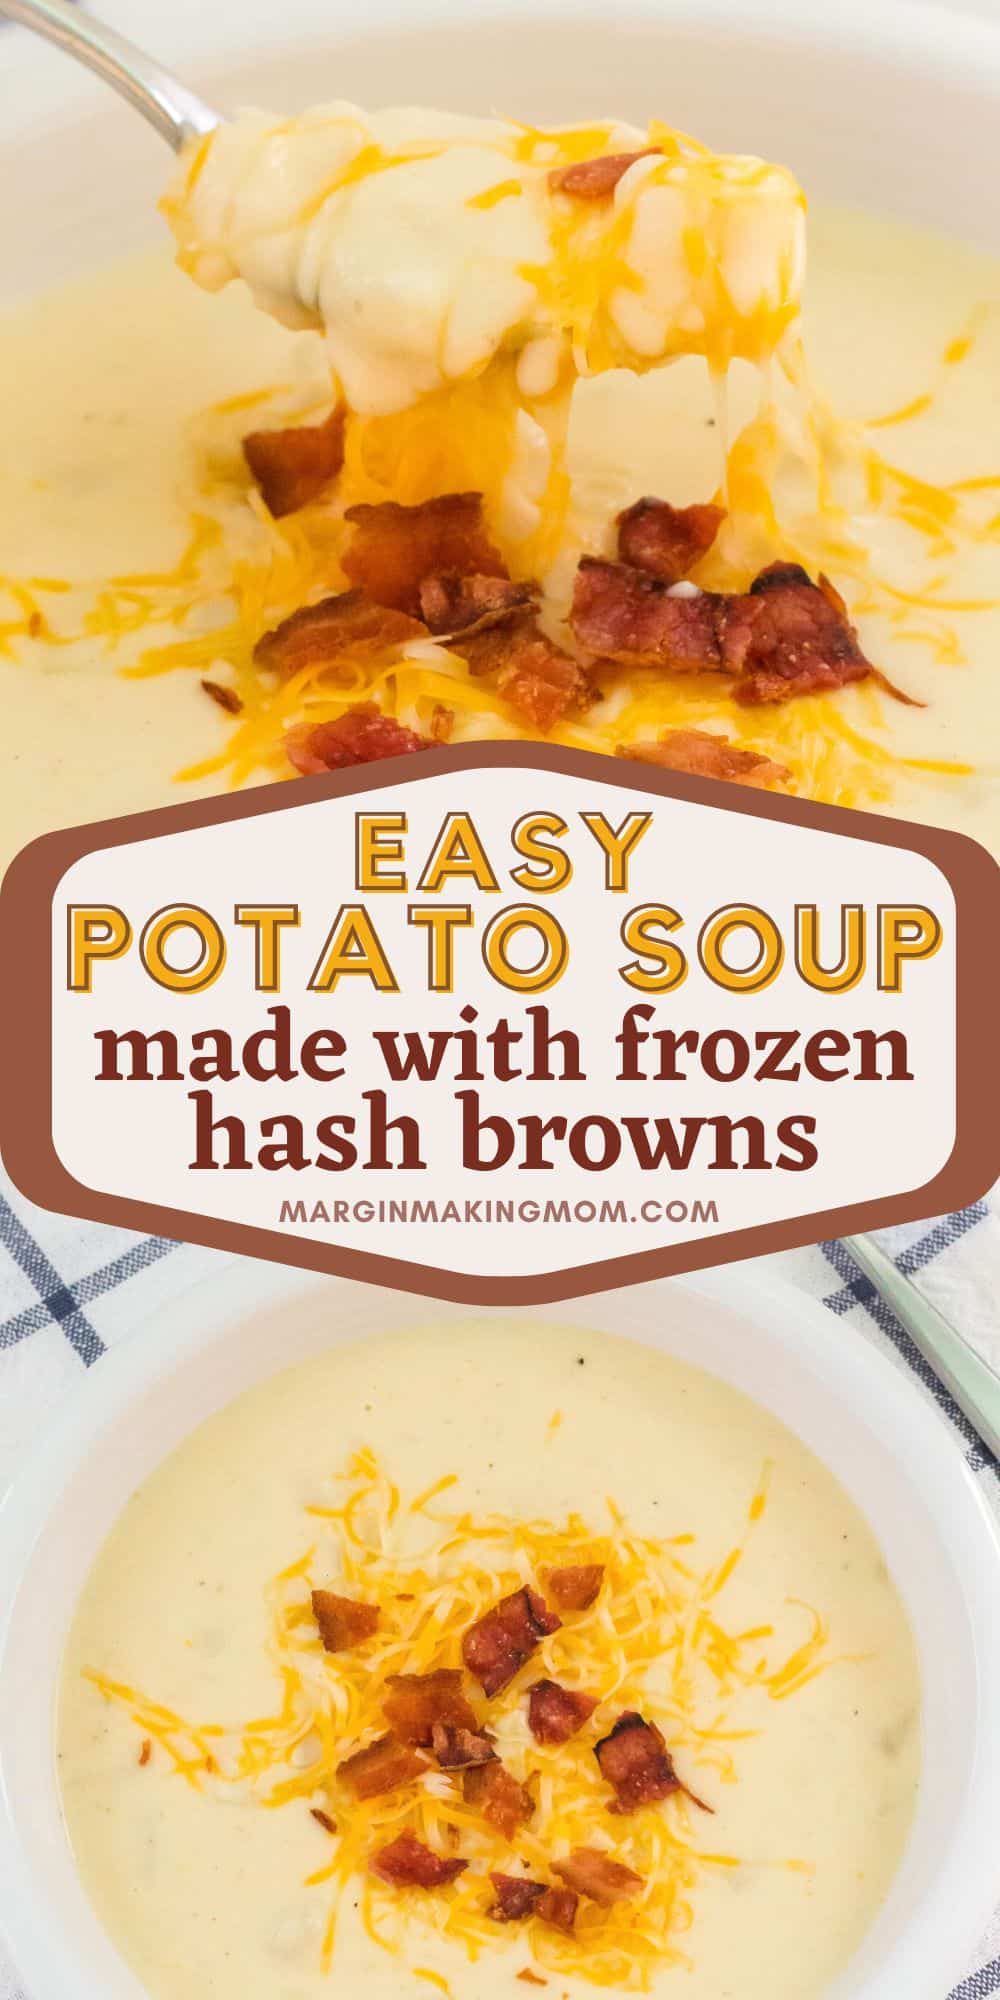 two photos; one shows cheesy potato soup with a spoon in it; the other shows an overhead view of hash brown potato soup in a white bowl atop a blue and white napkin.